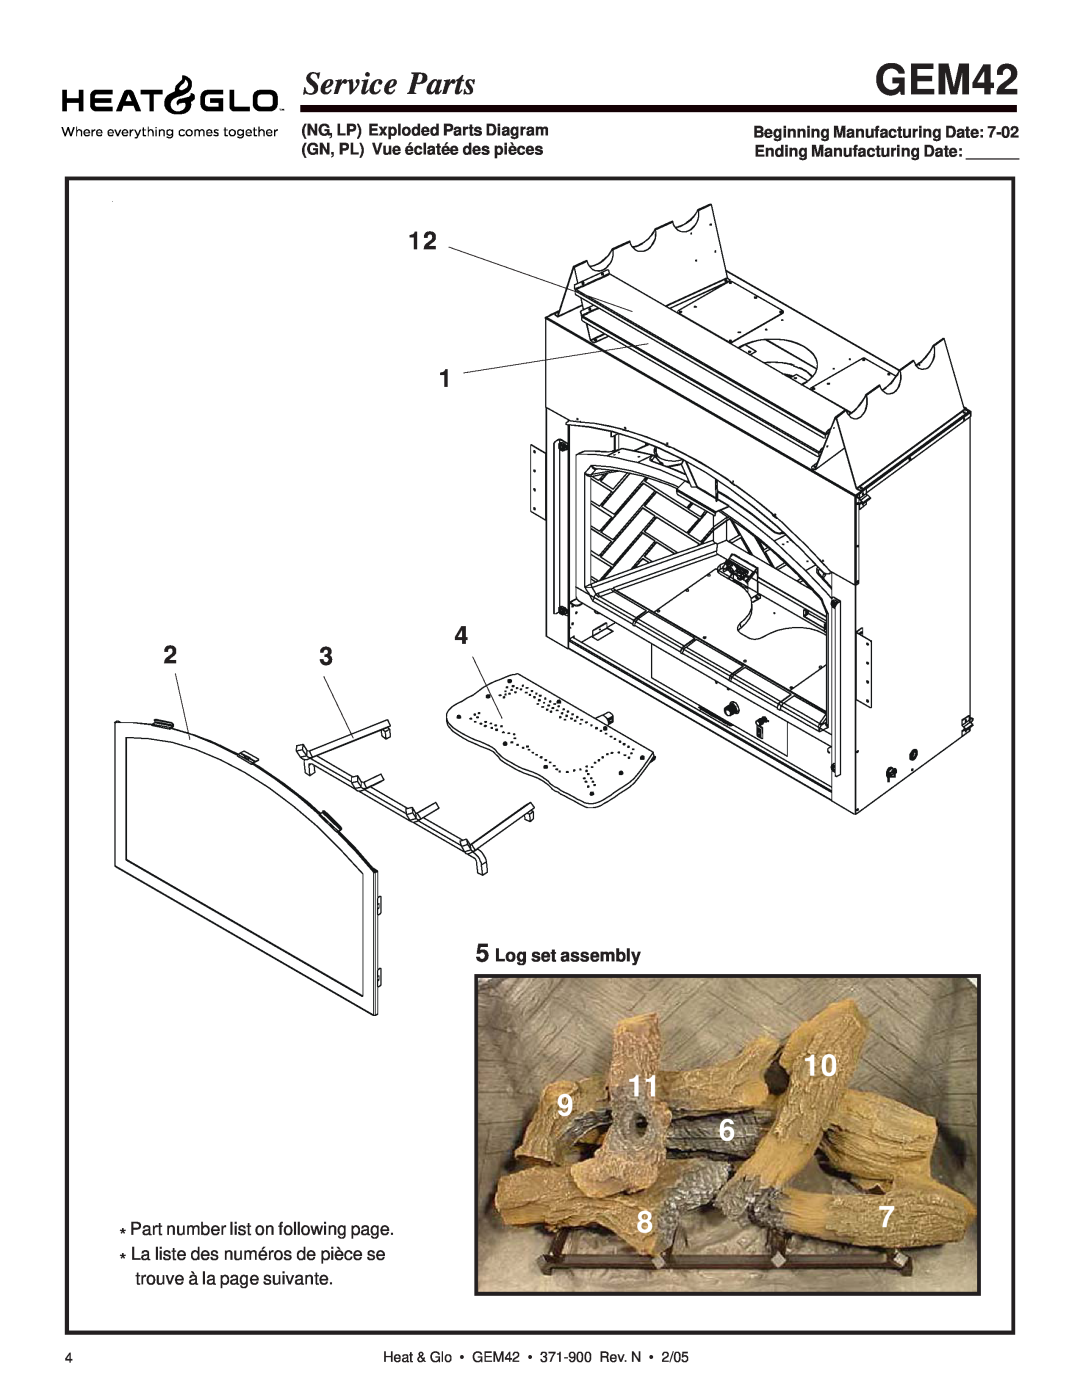 Heat & Glo LifeStyle GEM42 Service Parts, Log set assembly, NG, LP Exploded Parts Diagram, Beginning Manufacturing Date 